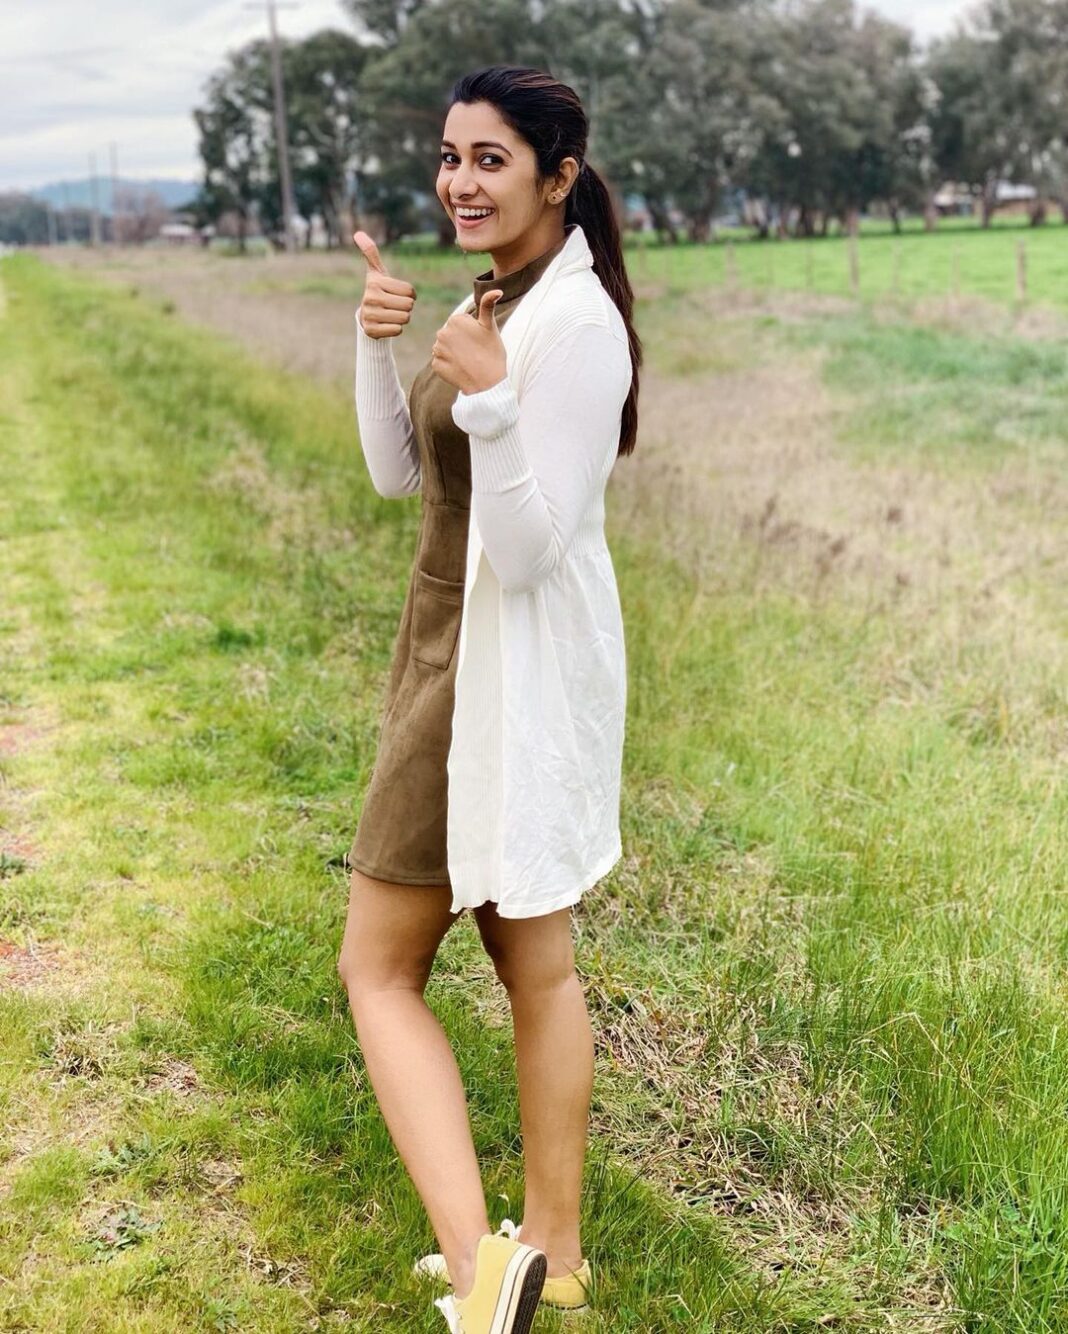 Priya Bhavani Shankar Instagram - Happiness on the face reflects the beauty of the place 🤗 #schedulebreaks #inbetweenshoots